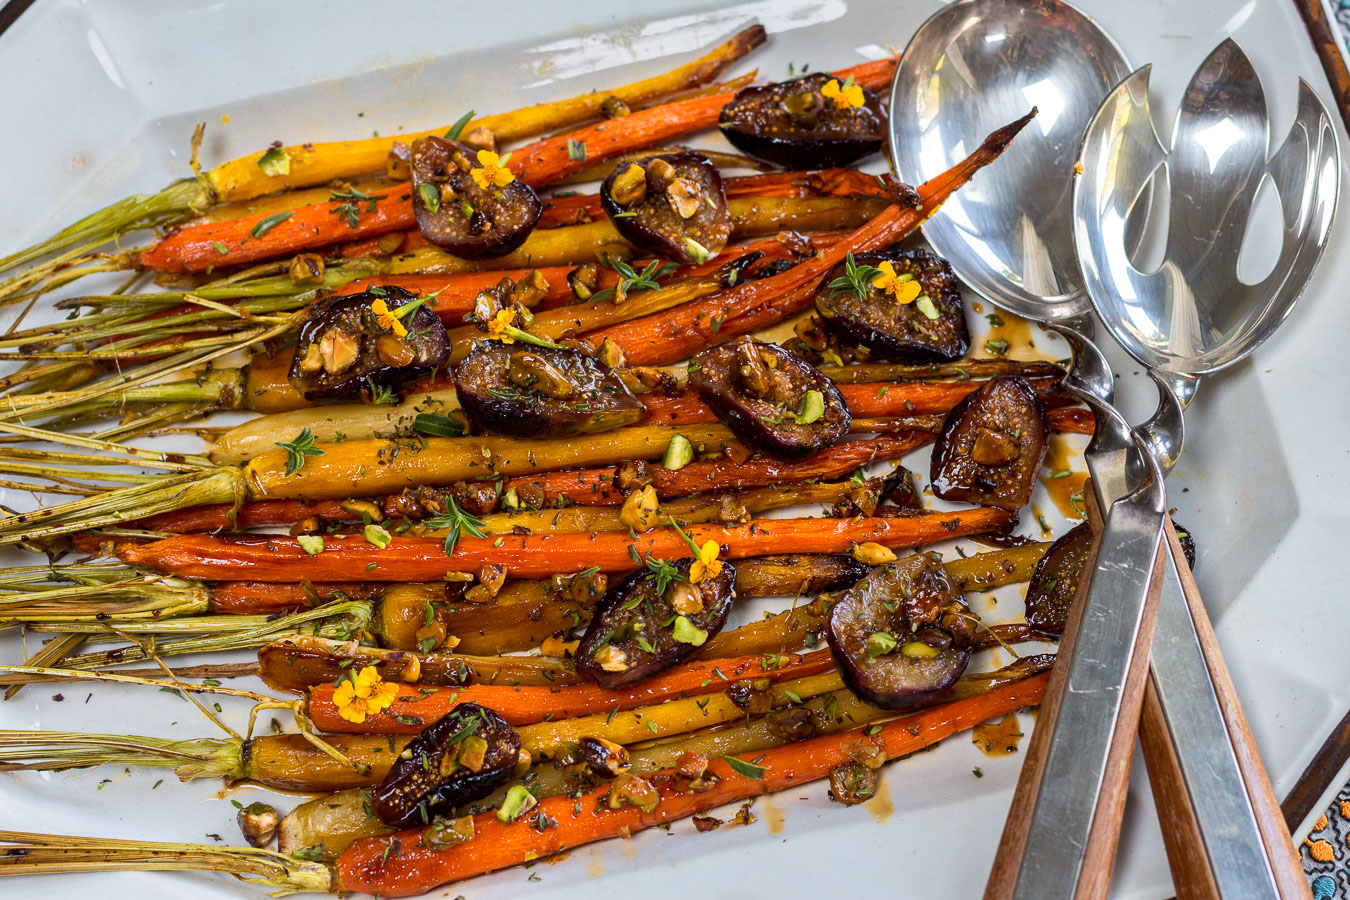 Carrots caramelize with the figs with a delectable just-sweet-enough glaze… all roasted in one pan